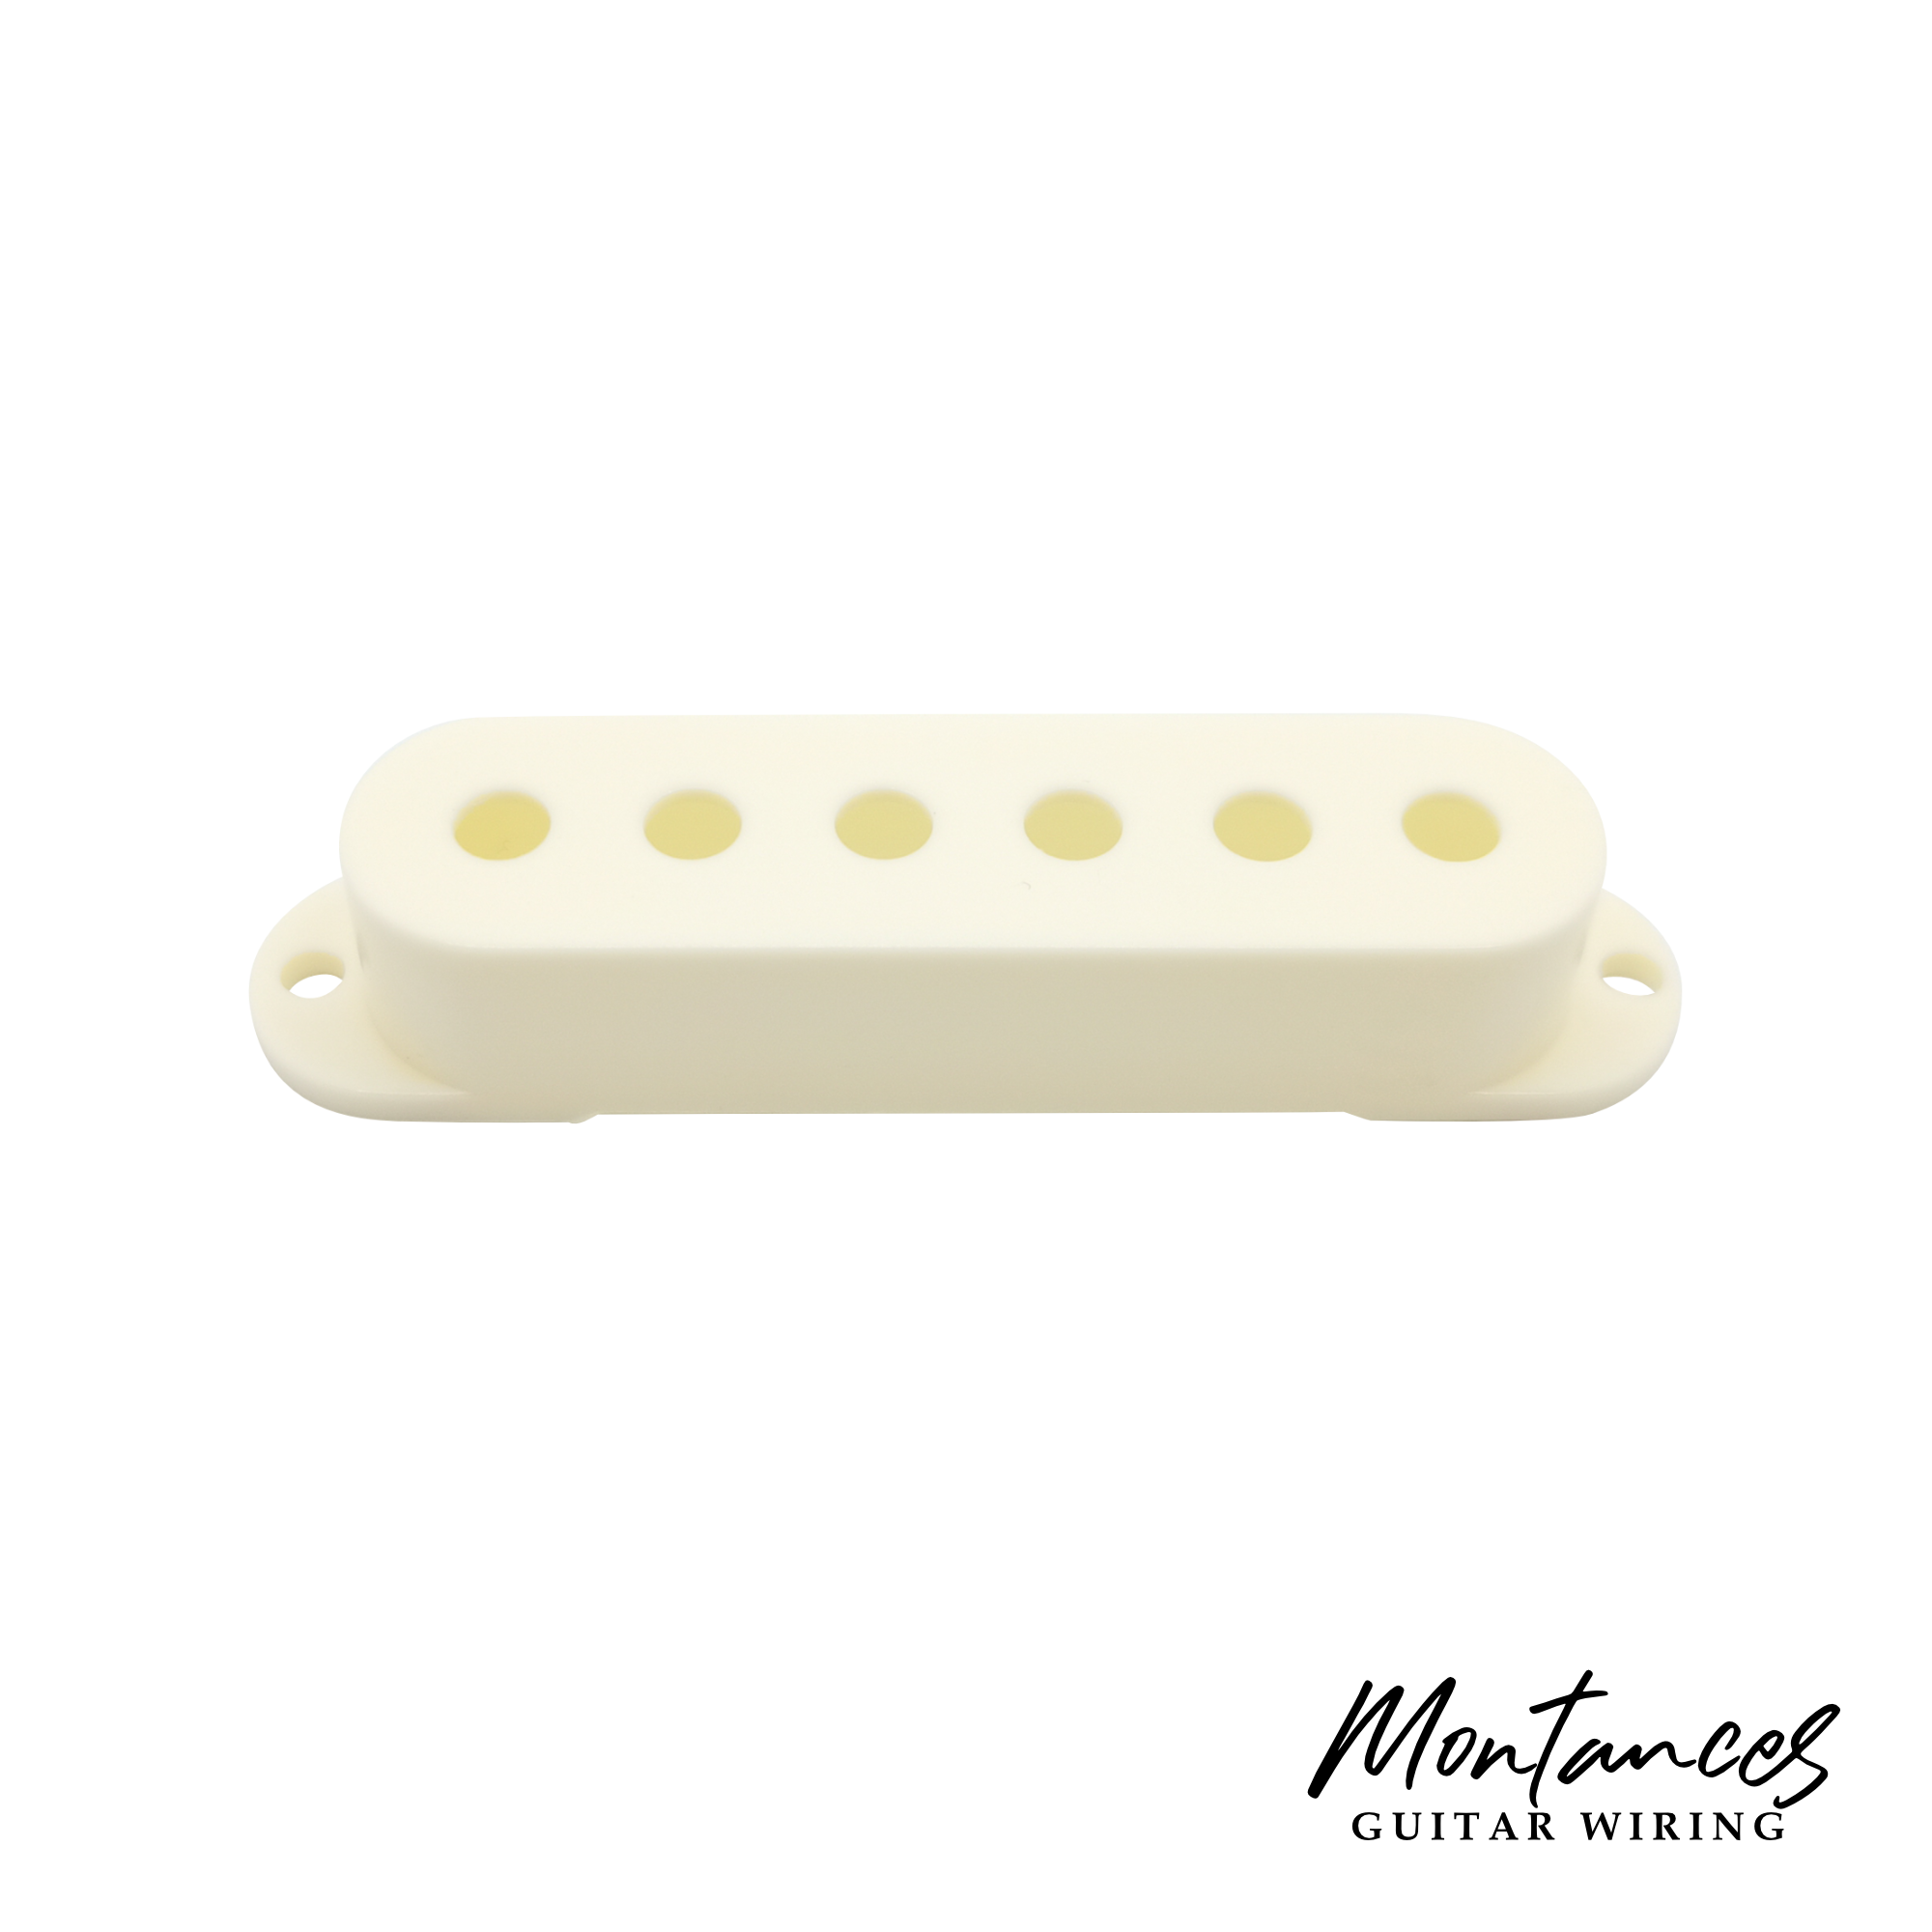 Strat Pickup Cover for Single-Coils 50mm spacing